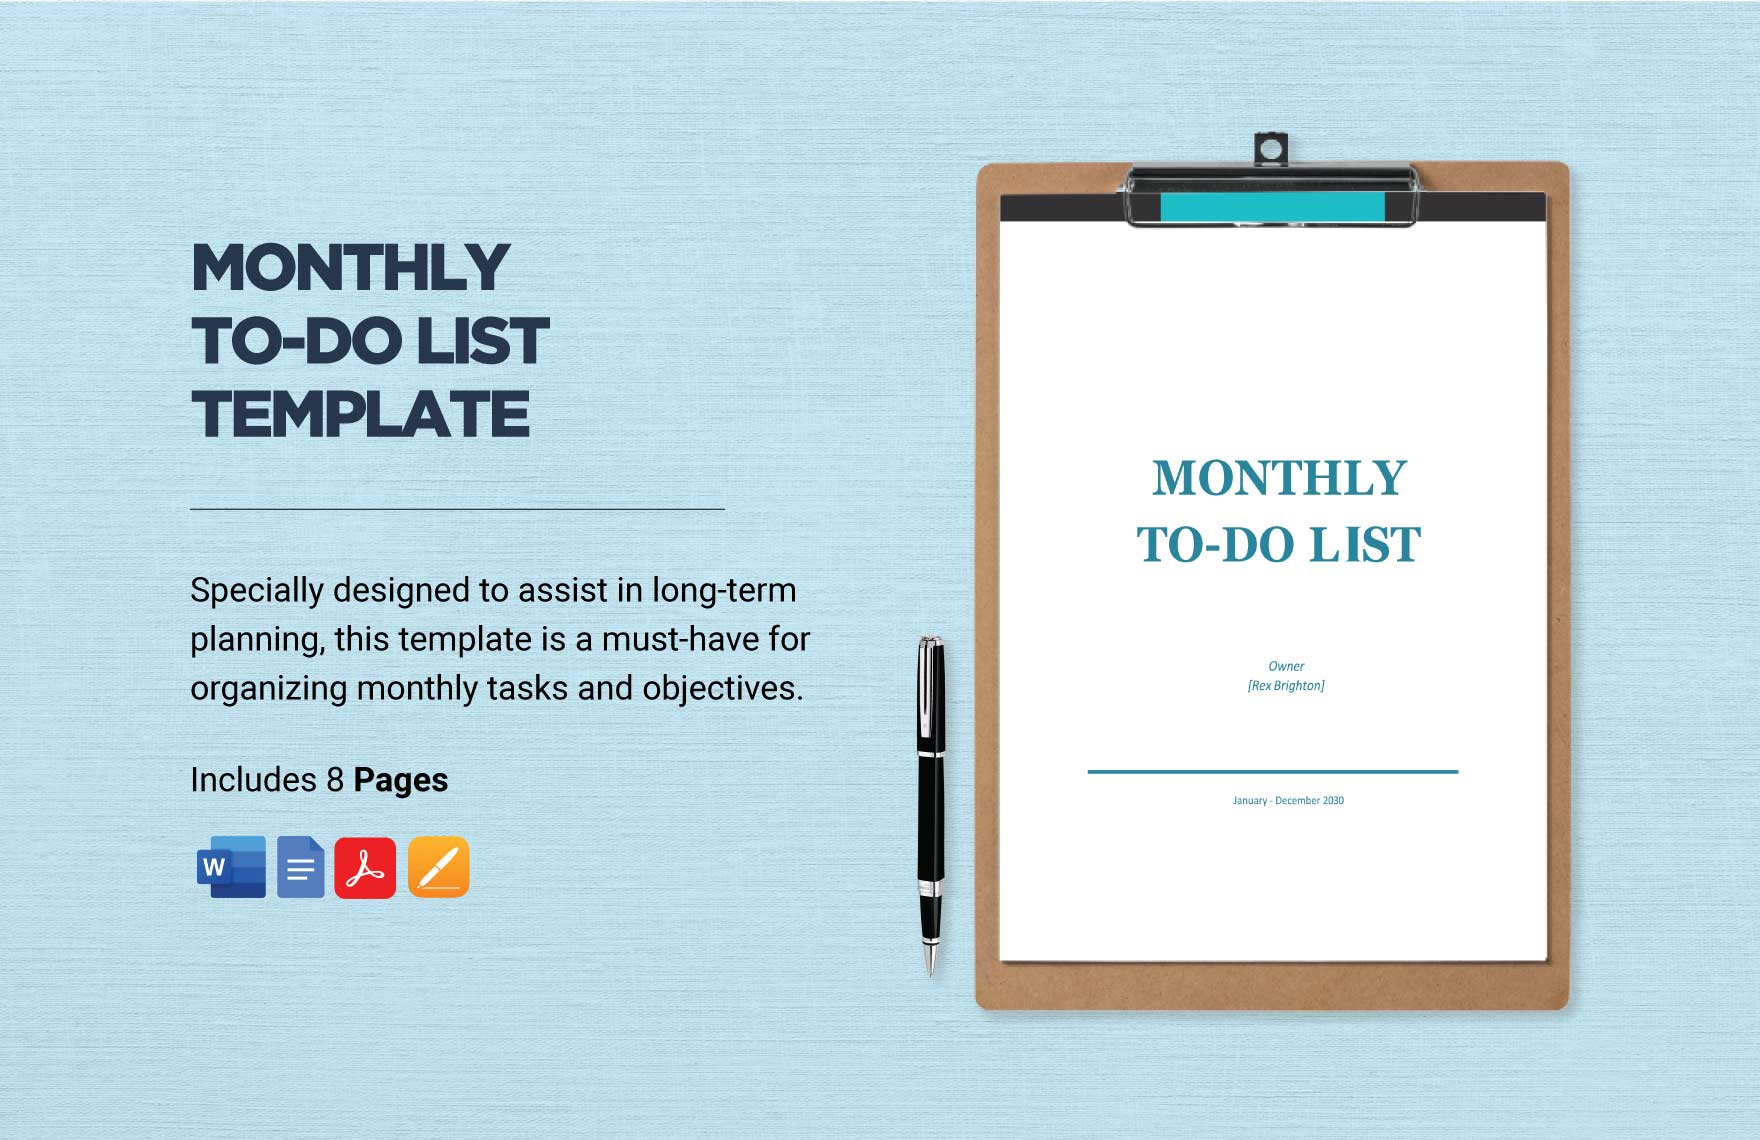 Monthly To-Do List Template